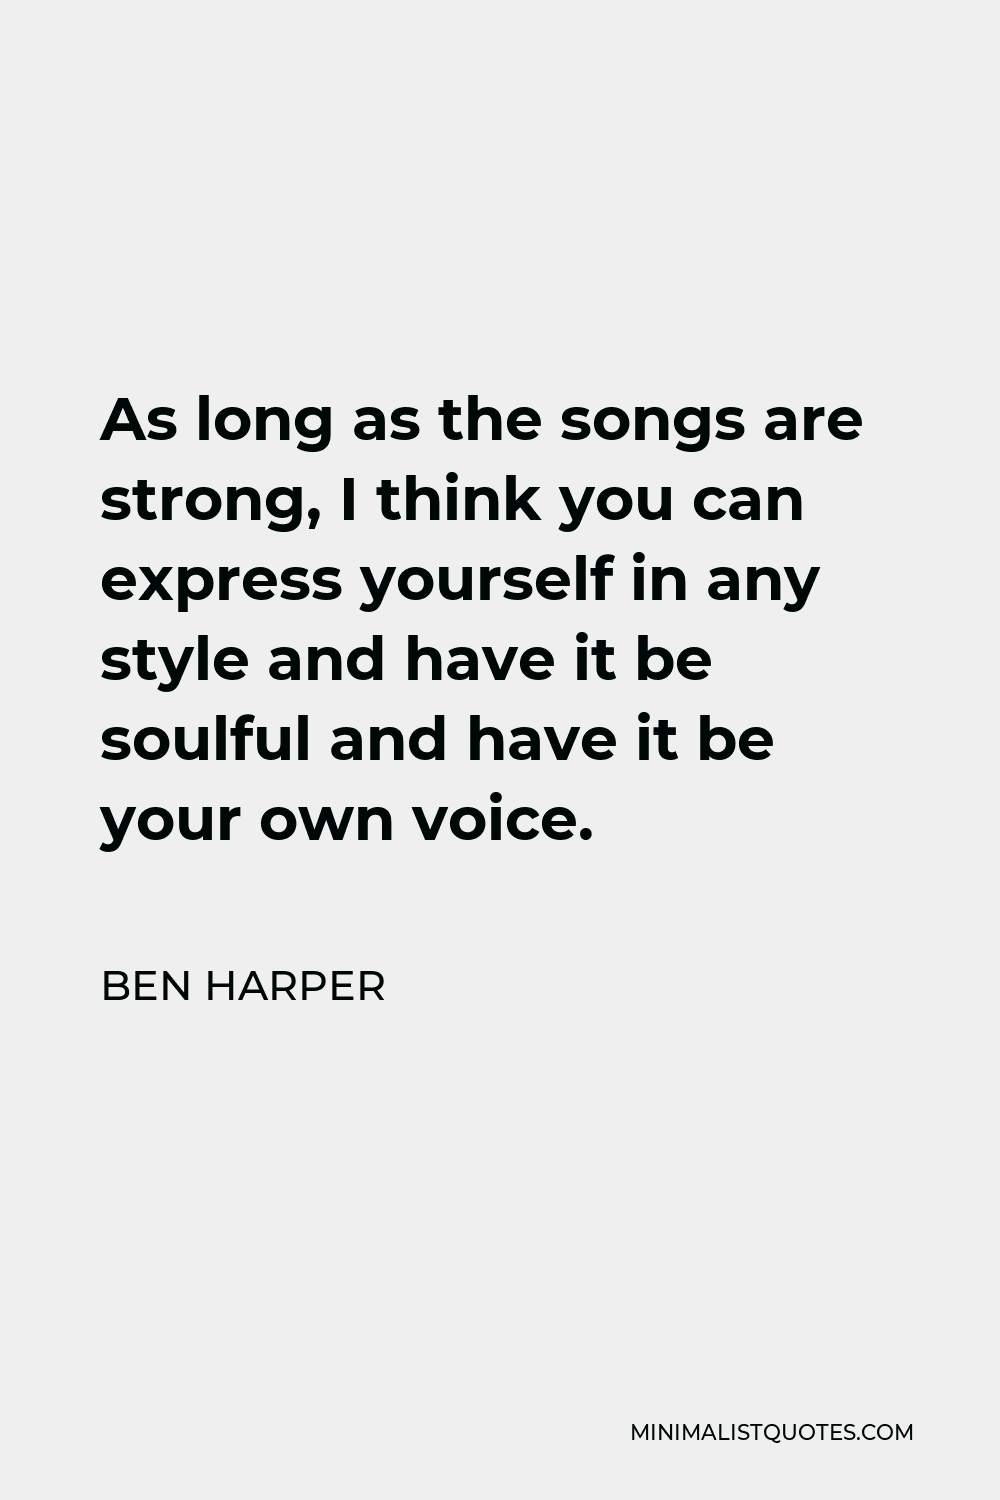 Ben Harper Quote - As long as the songs are strong, I think you can express yourself in any style and have it be soulful and have it be your own voice.